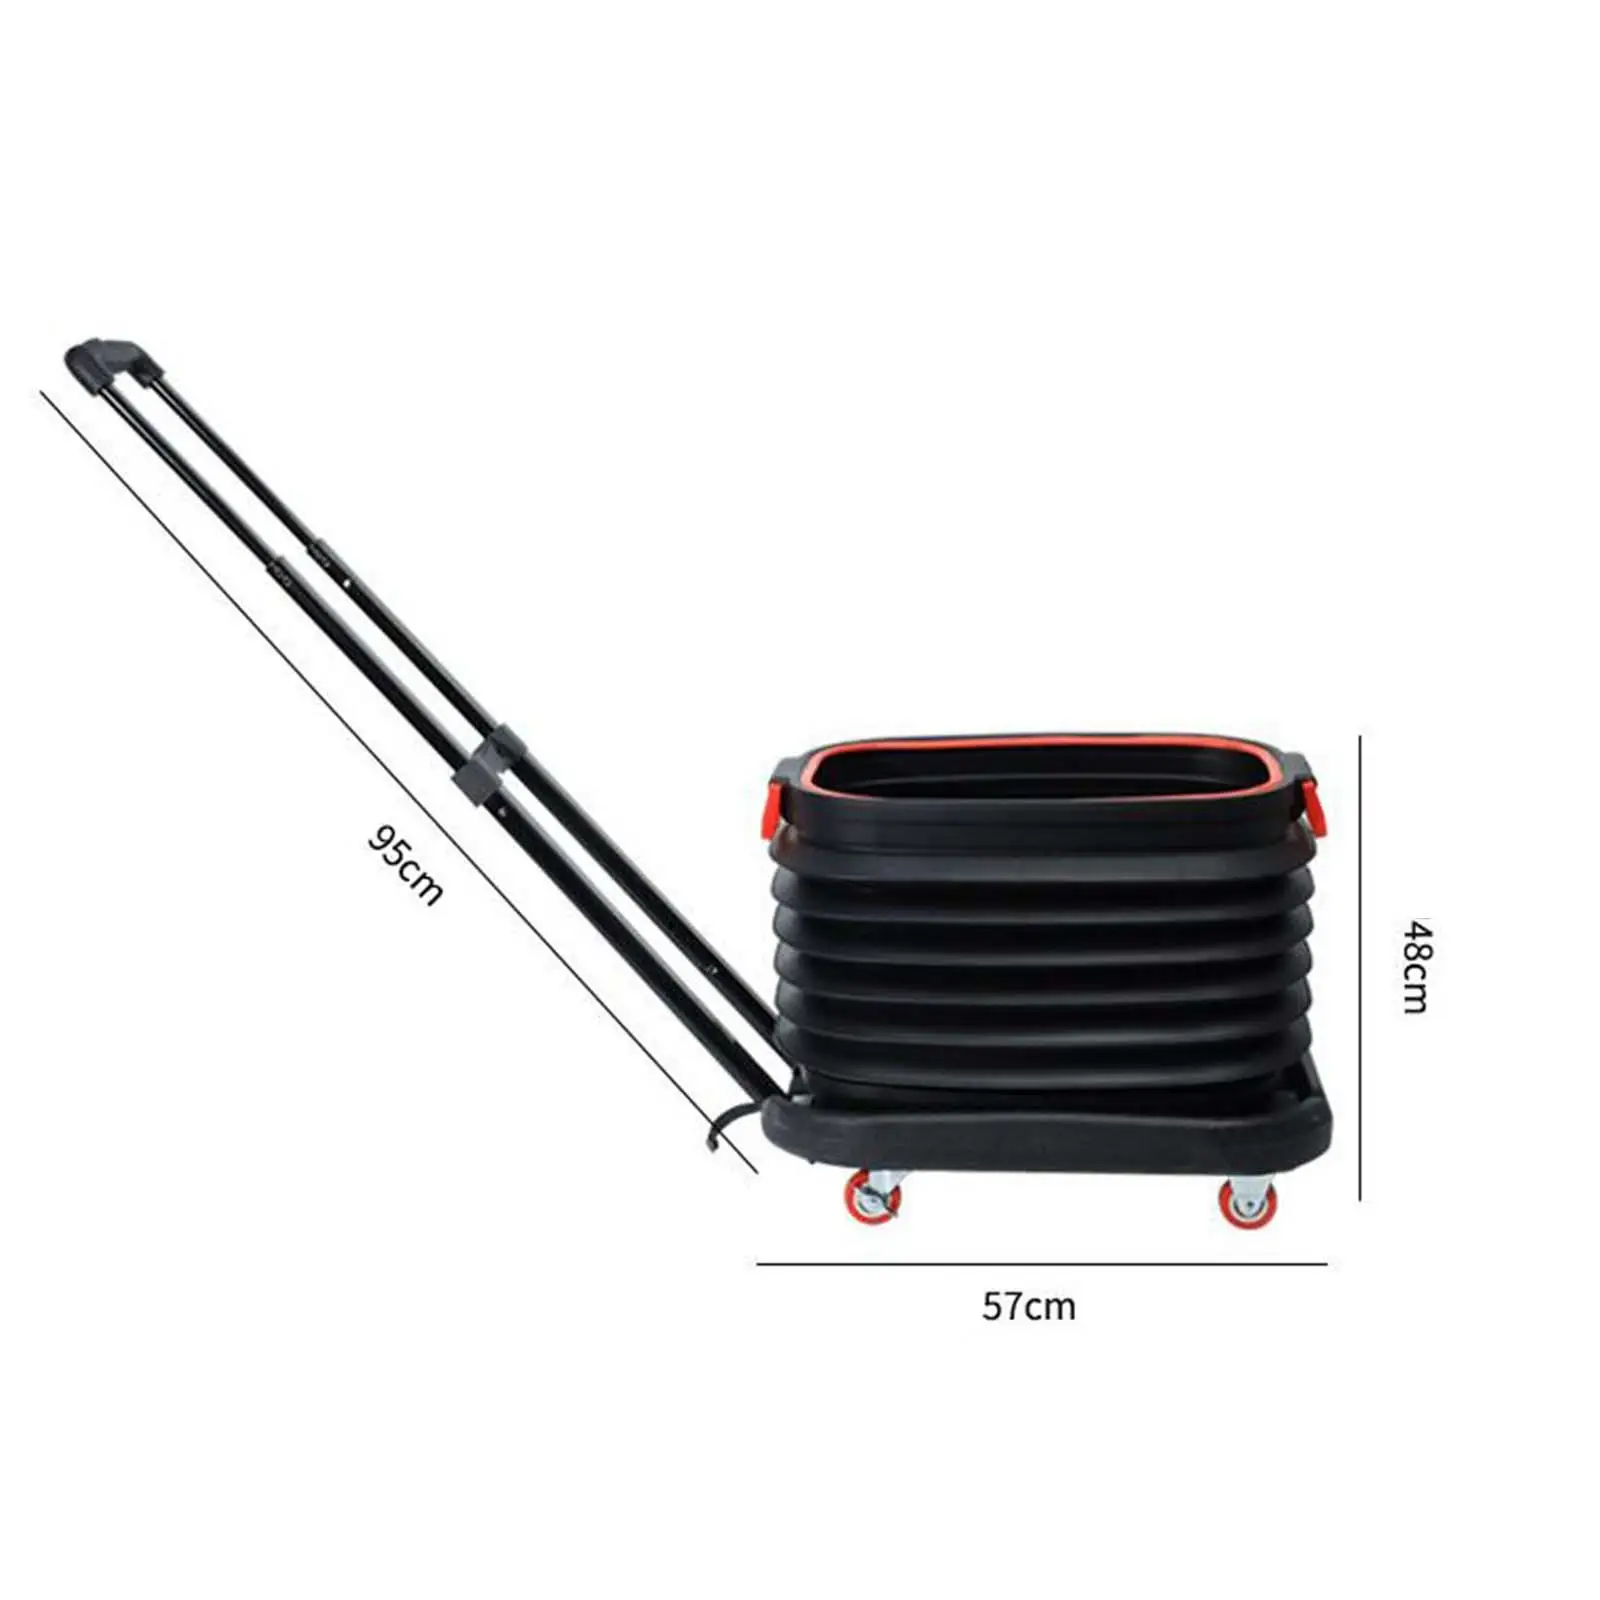 Collapsible Car Bucket Fishing Basket with Wheels 37L Trolley Durable Professional Portable Car Bin Telescoping Aluminum Handle